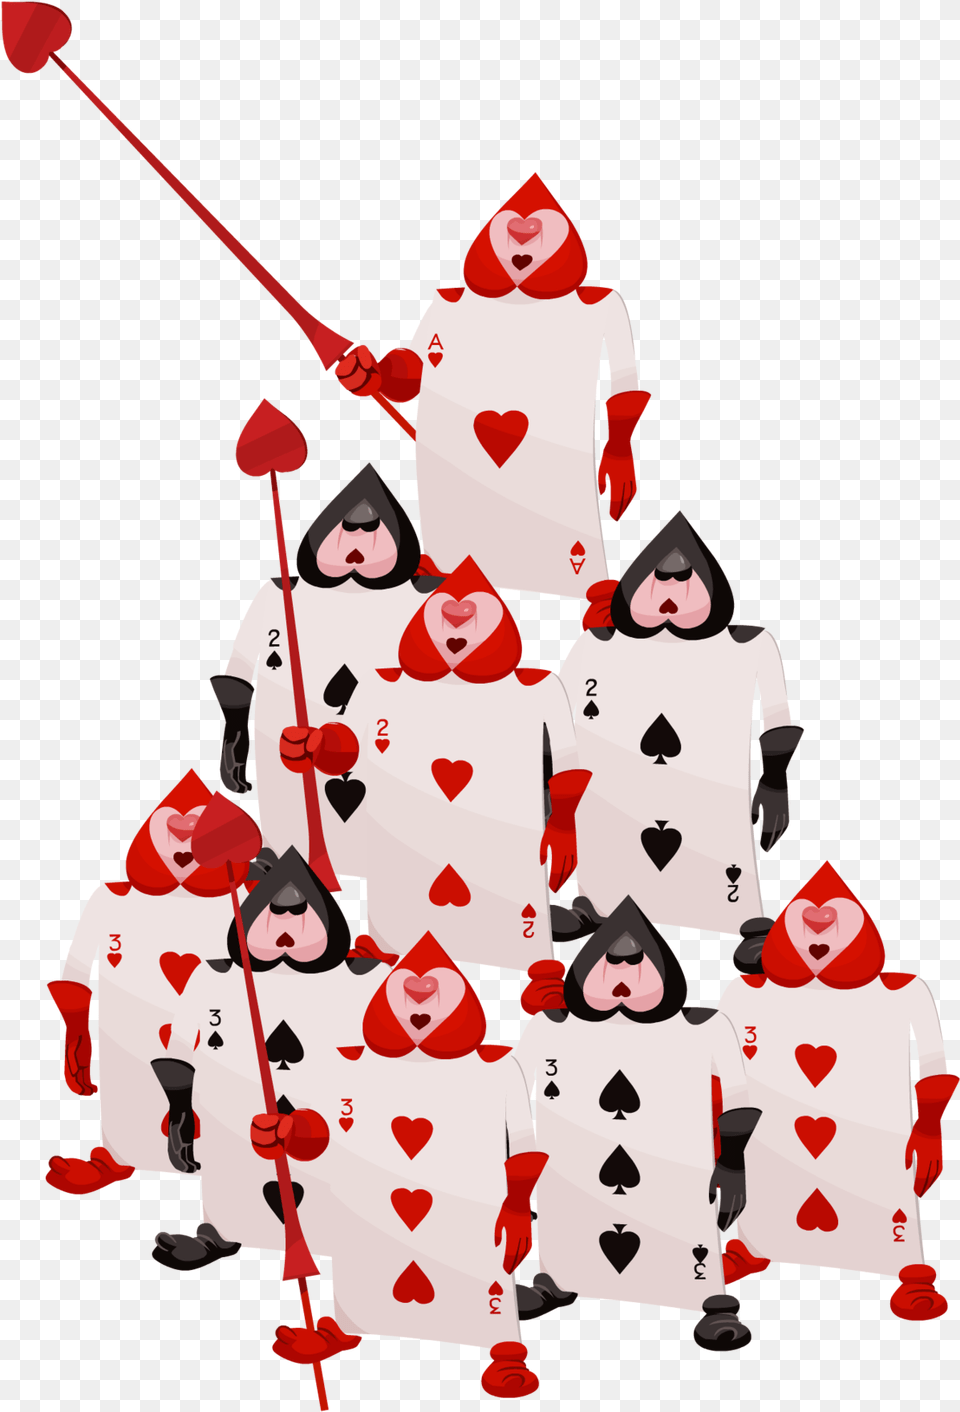 Playing Cards Kingdom Hearts Wiki The Kingdom Hearts Alice In Wonderland Card Soldiers, People, Person, Animal, Bear Free Png Download